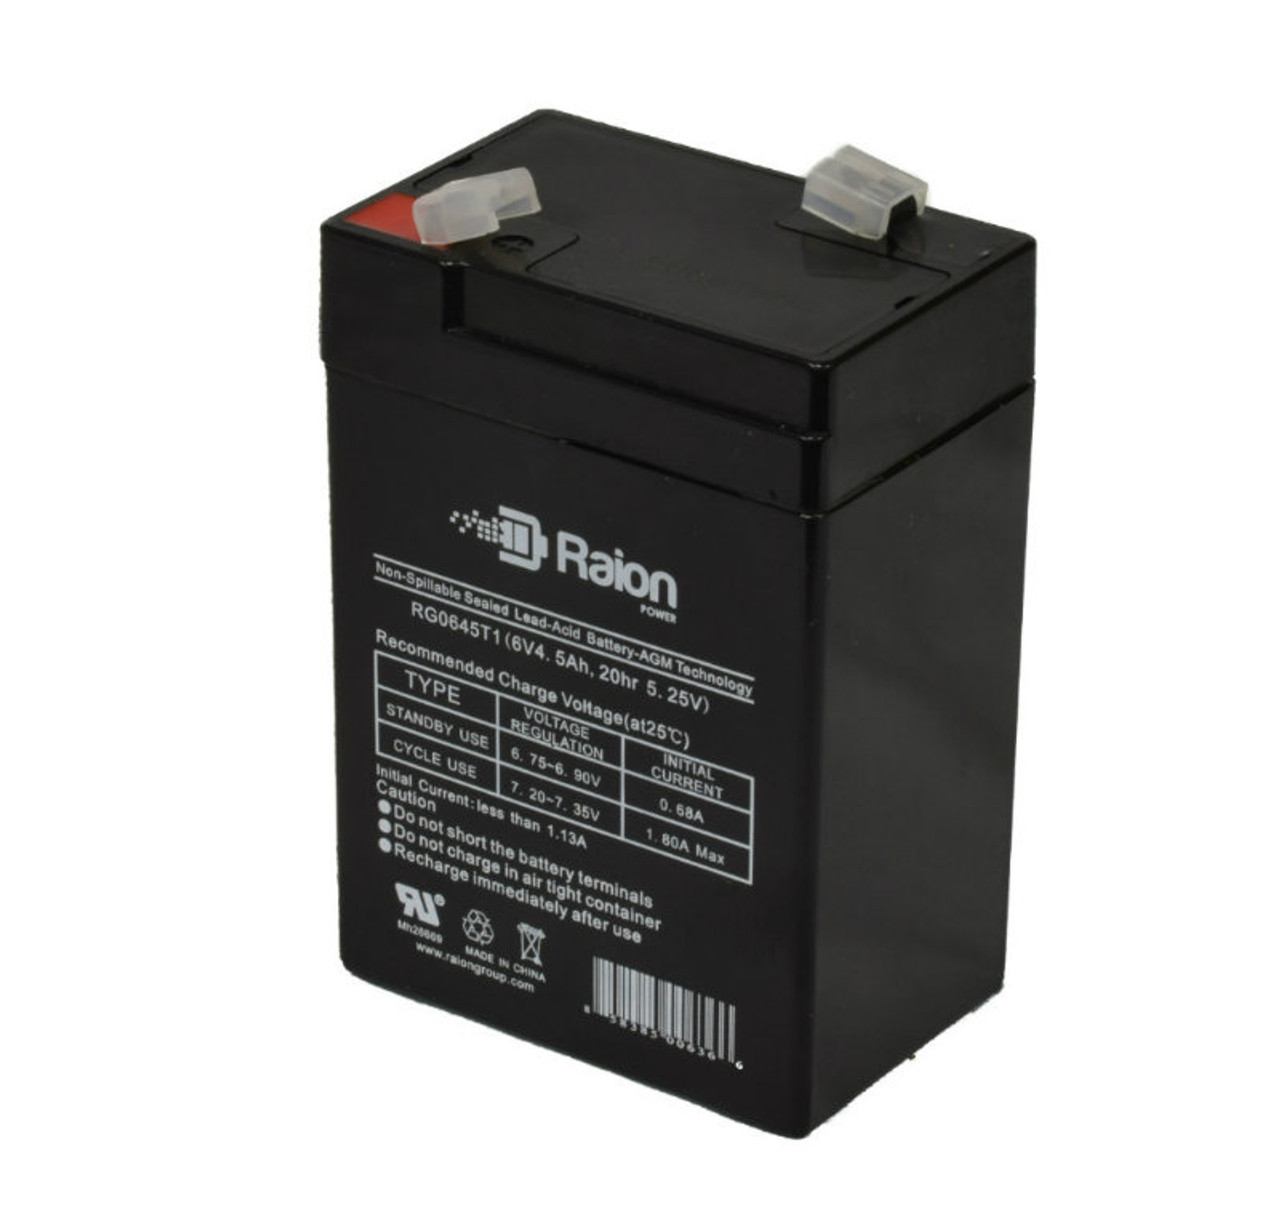 Raion Power RG0645T1 6V 4.5Ah Replacement Battery Cartridge for TOBBI 6V Kids Ride on Motorcycle